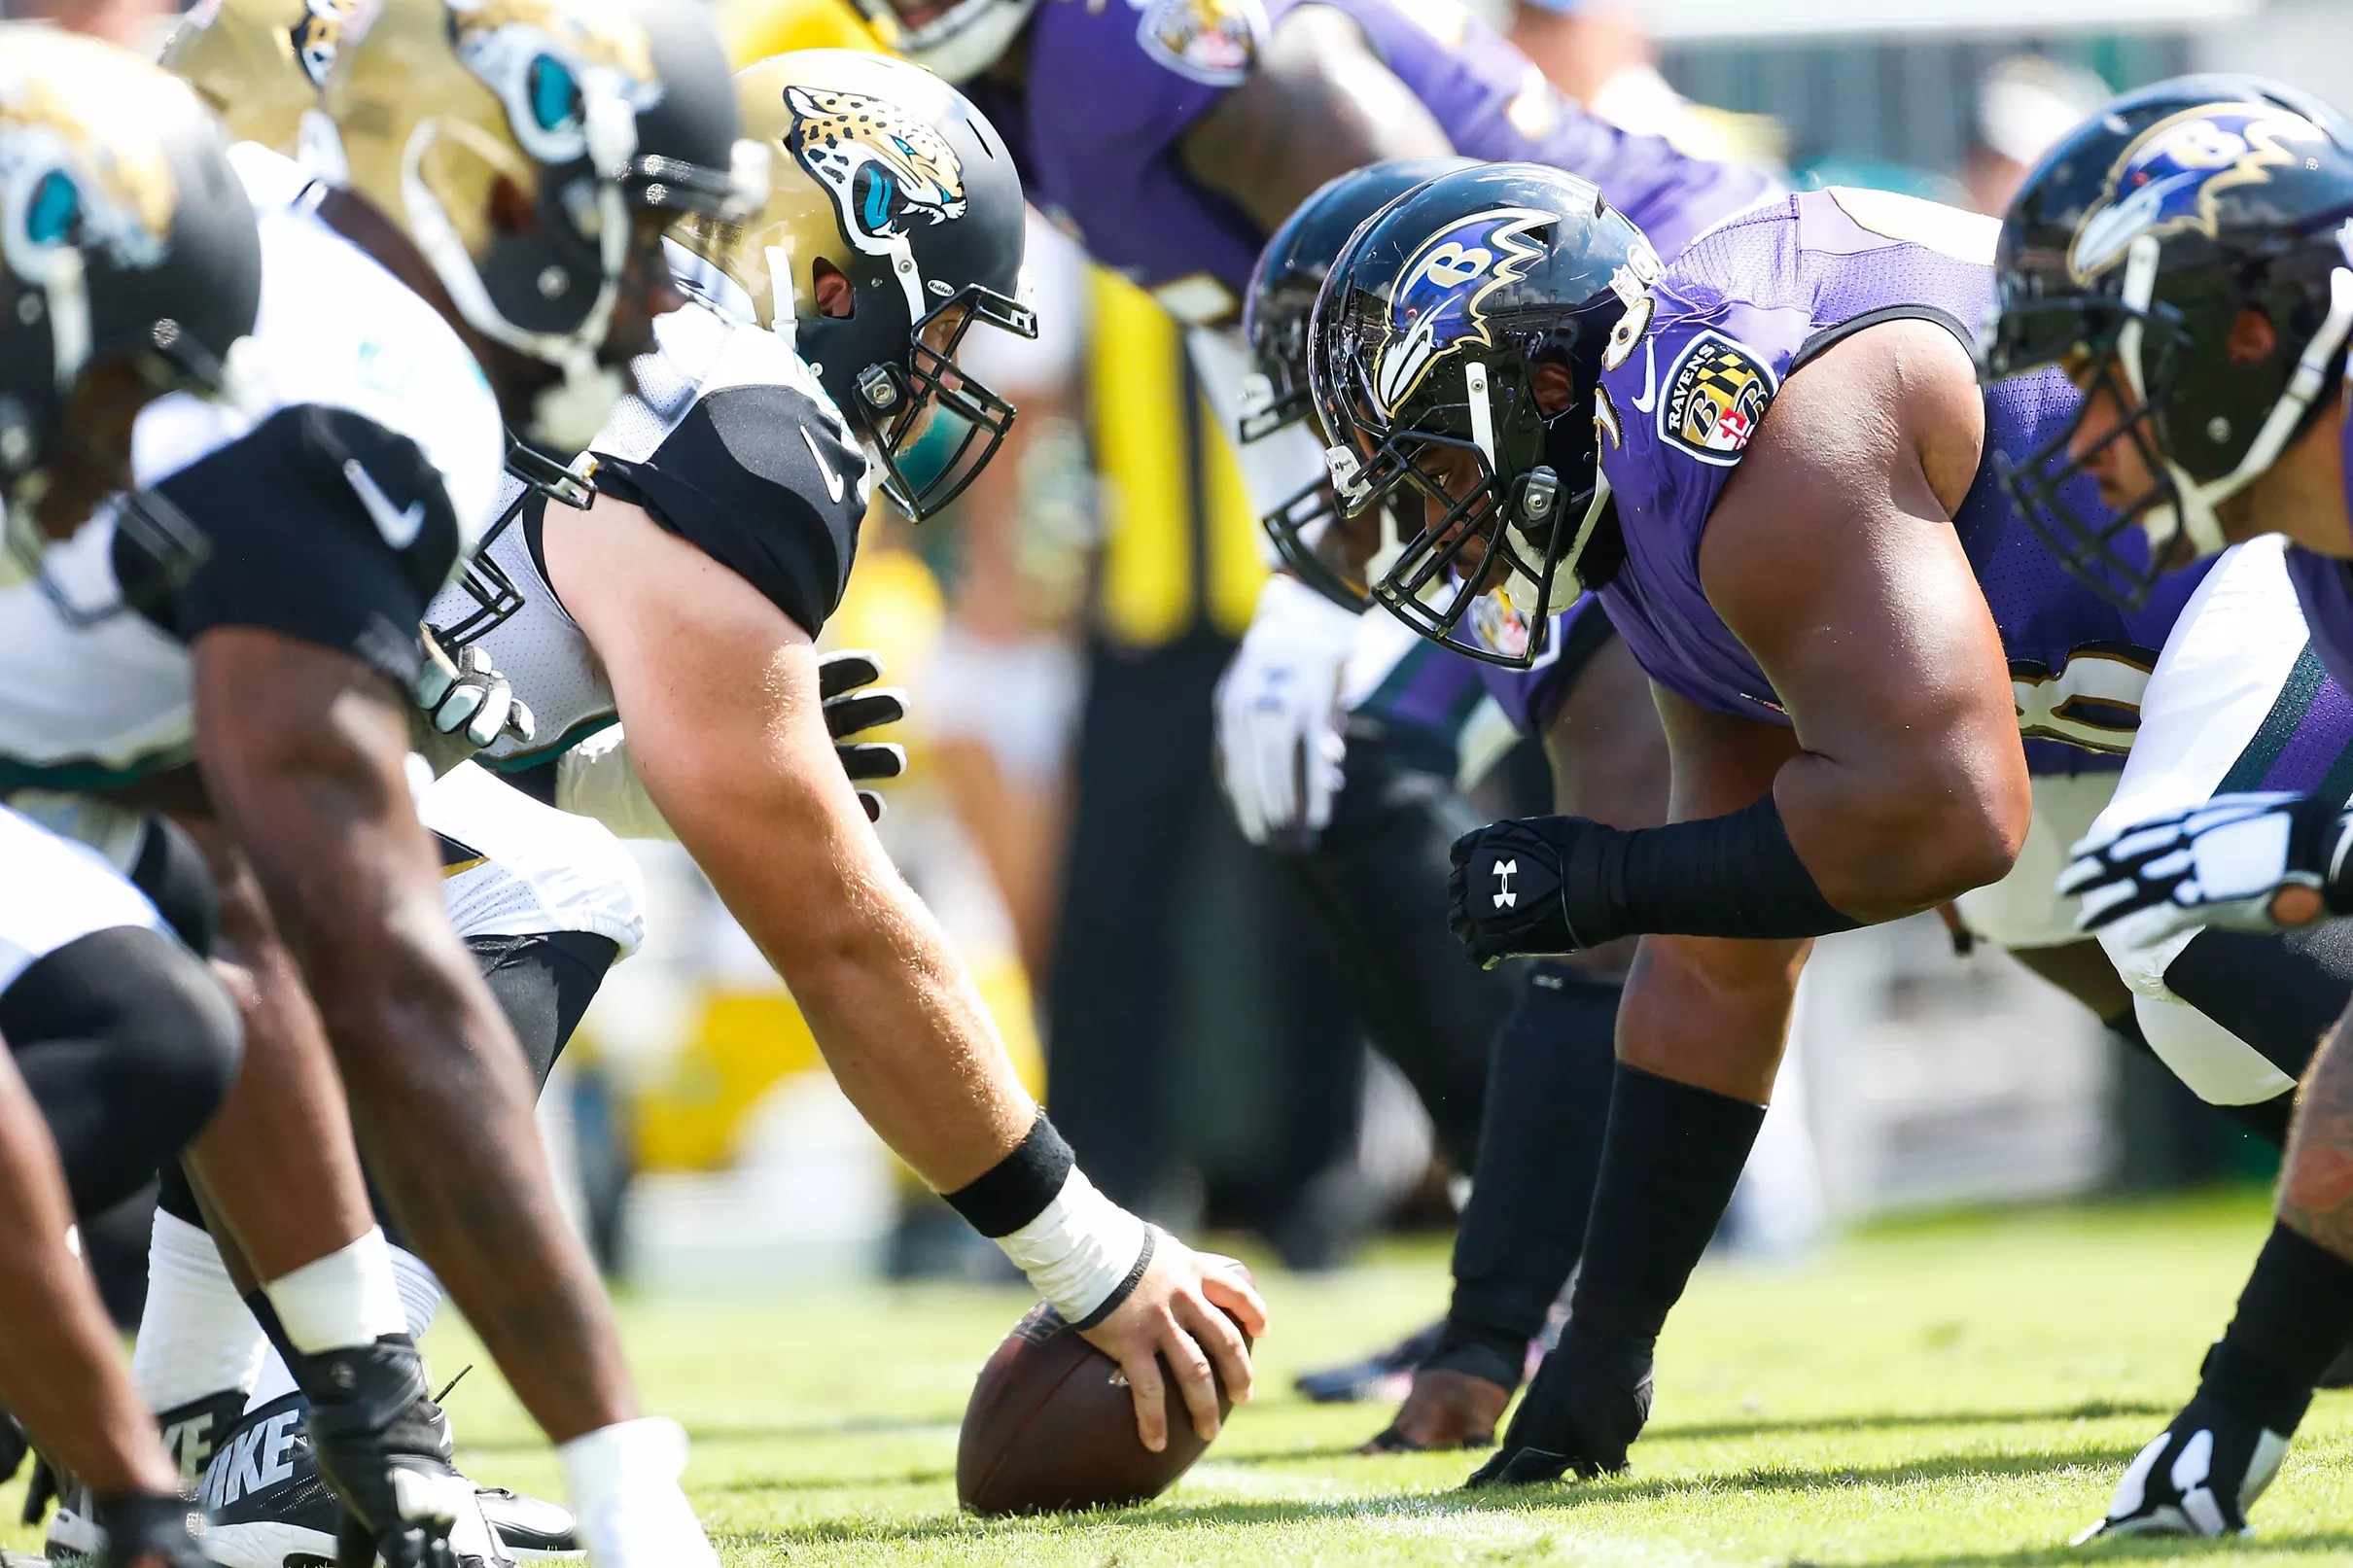 Ravens vs. Jaguars is an underrated rivalry